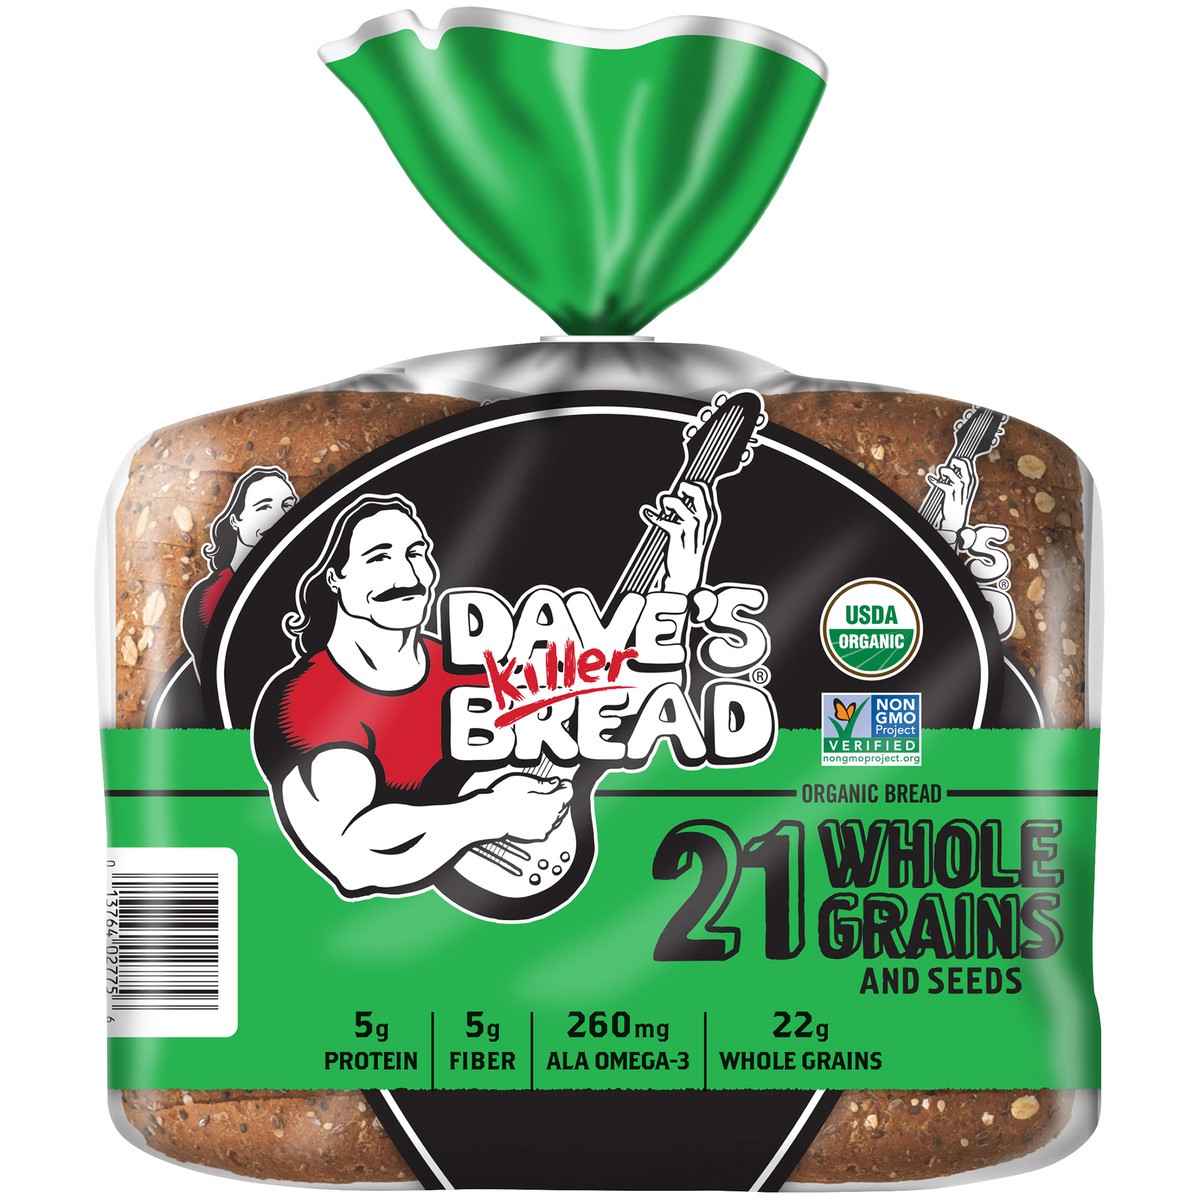 slide 8 of 12, Dave's Killer Bread 21 Whole Grains and Seeds, Whole Grain Organic Bread, 2-27 oz Loaves, 2 ct